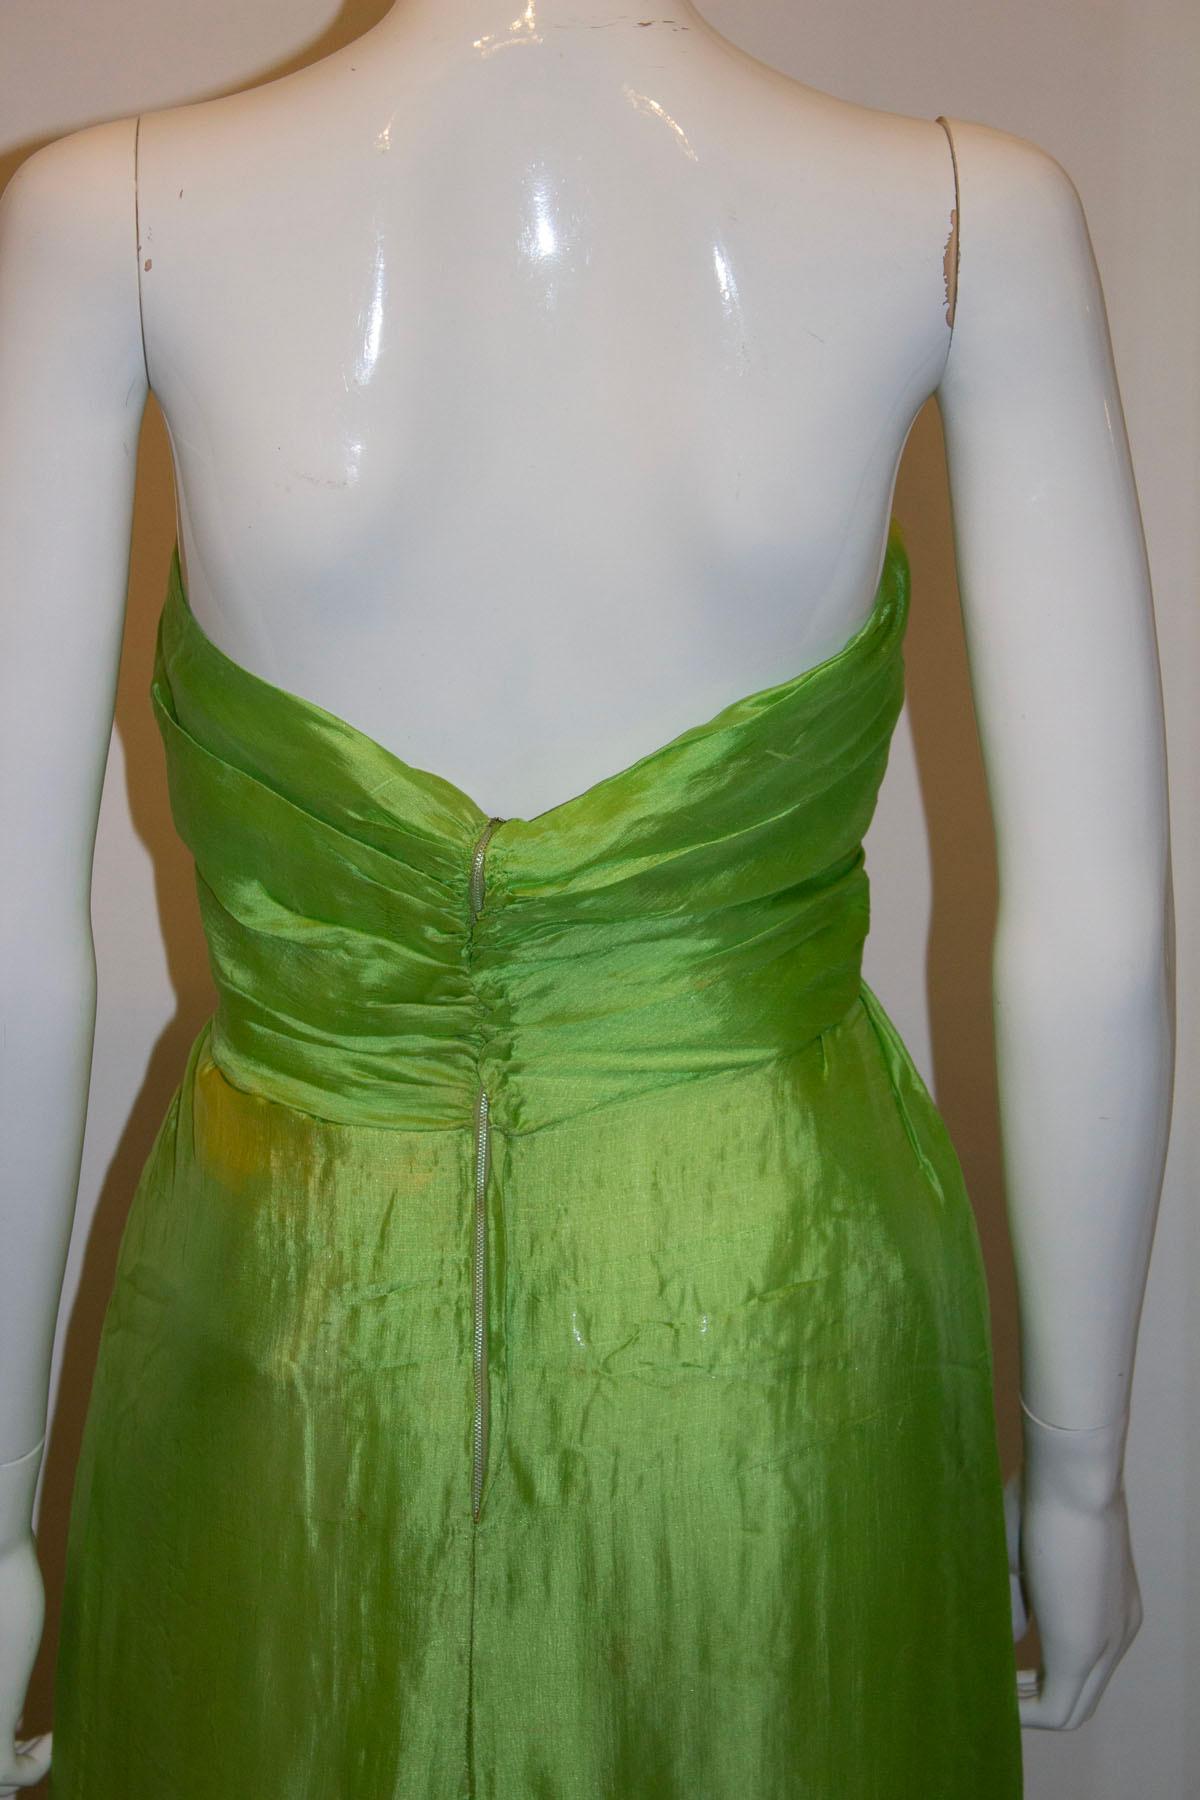 A stunning vintage couture gown and jacket by the famous Italian designer Irene Galitzine. The gown is strapless in a vibrant green colour with boning and a back zip. The dress is lined in silk, and has weights in the hem.
The jacket is green with 